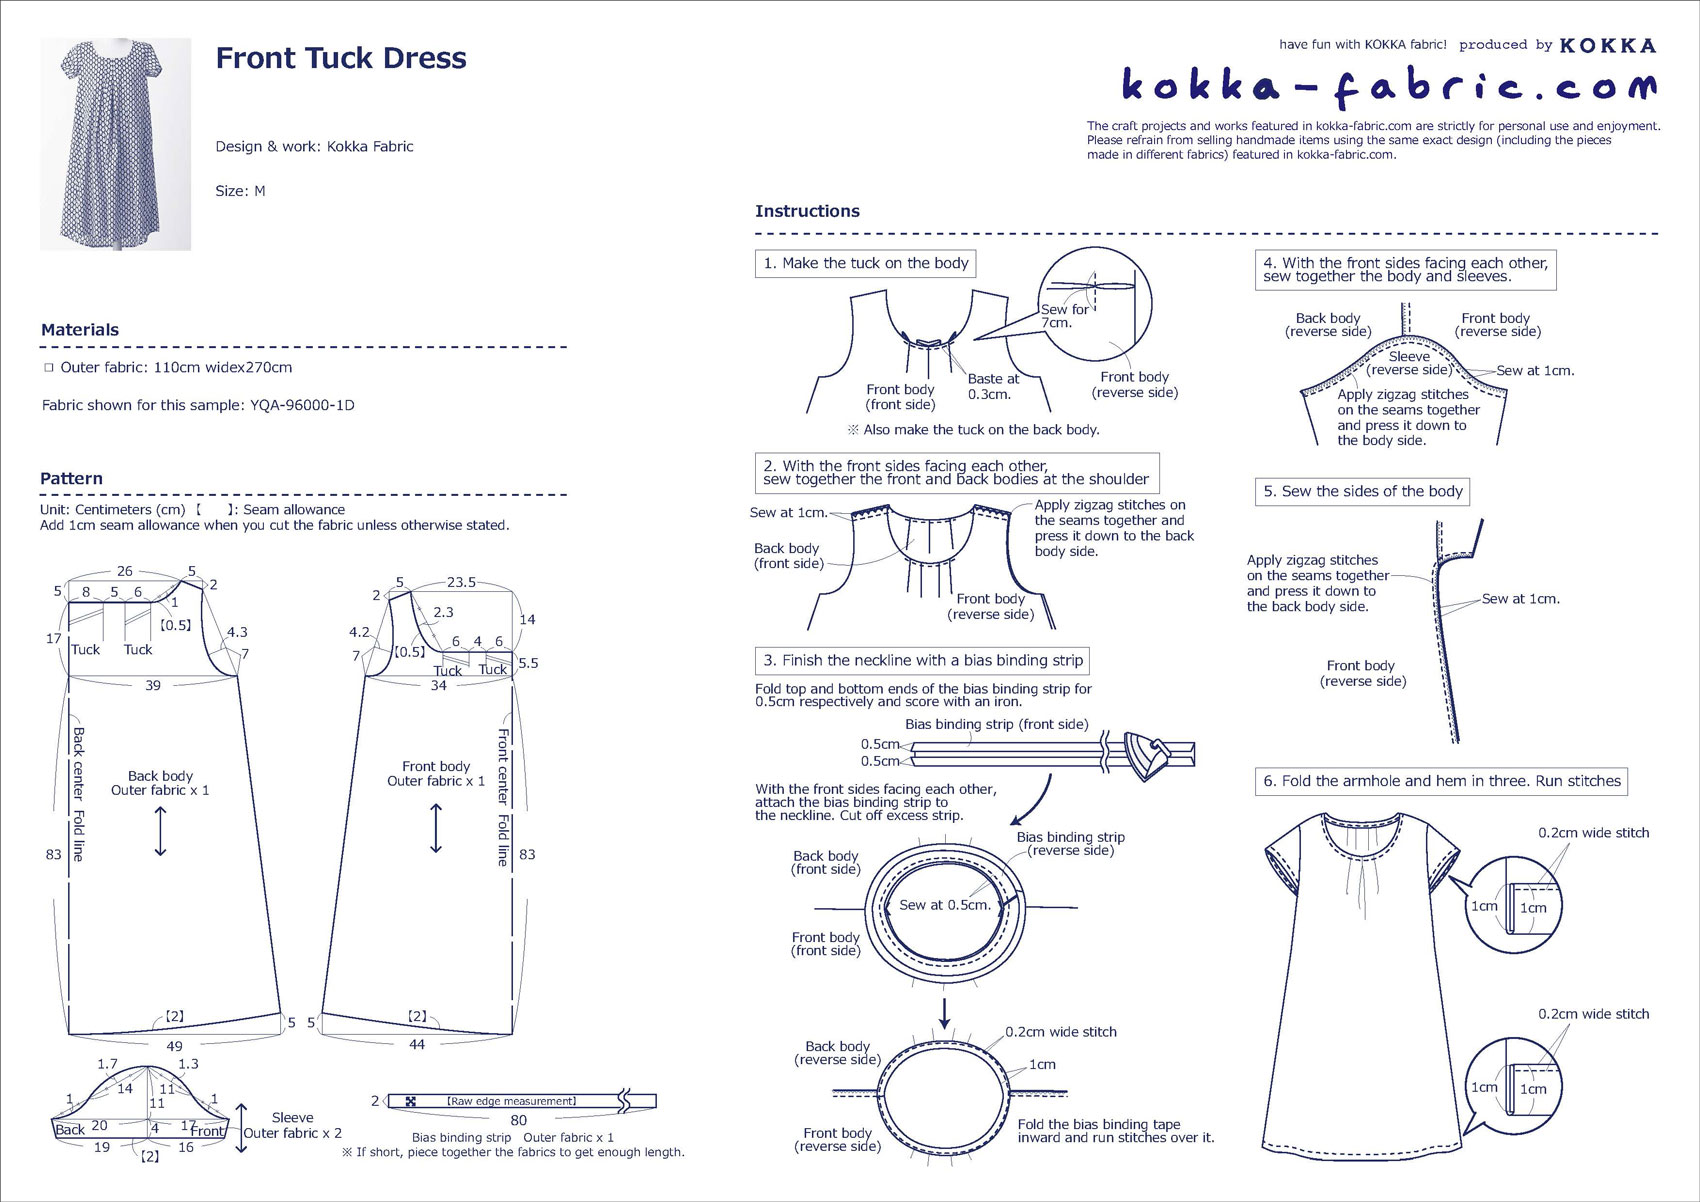 Front Tuck Dress with an Elegant Chest Line – Sewing Instructions